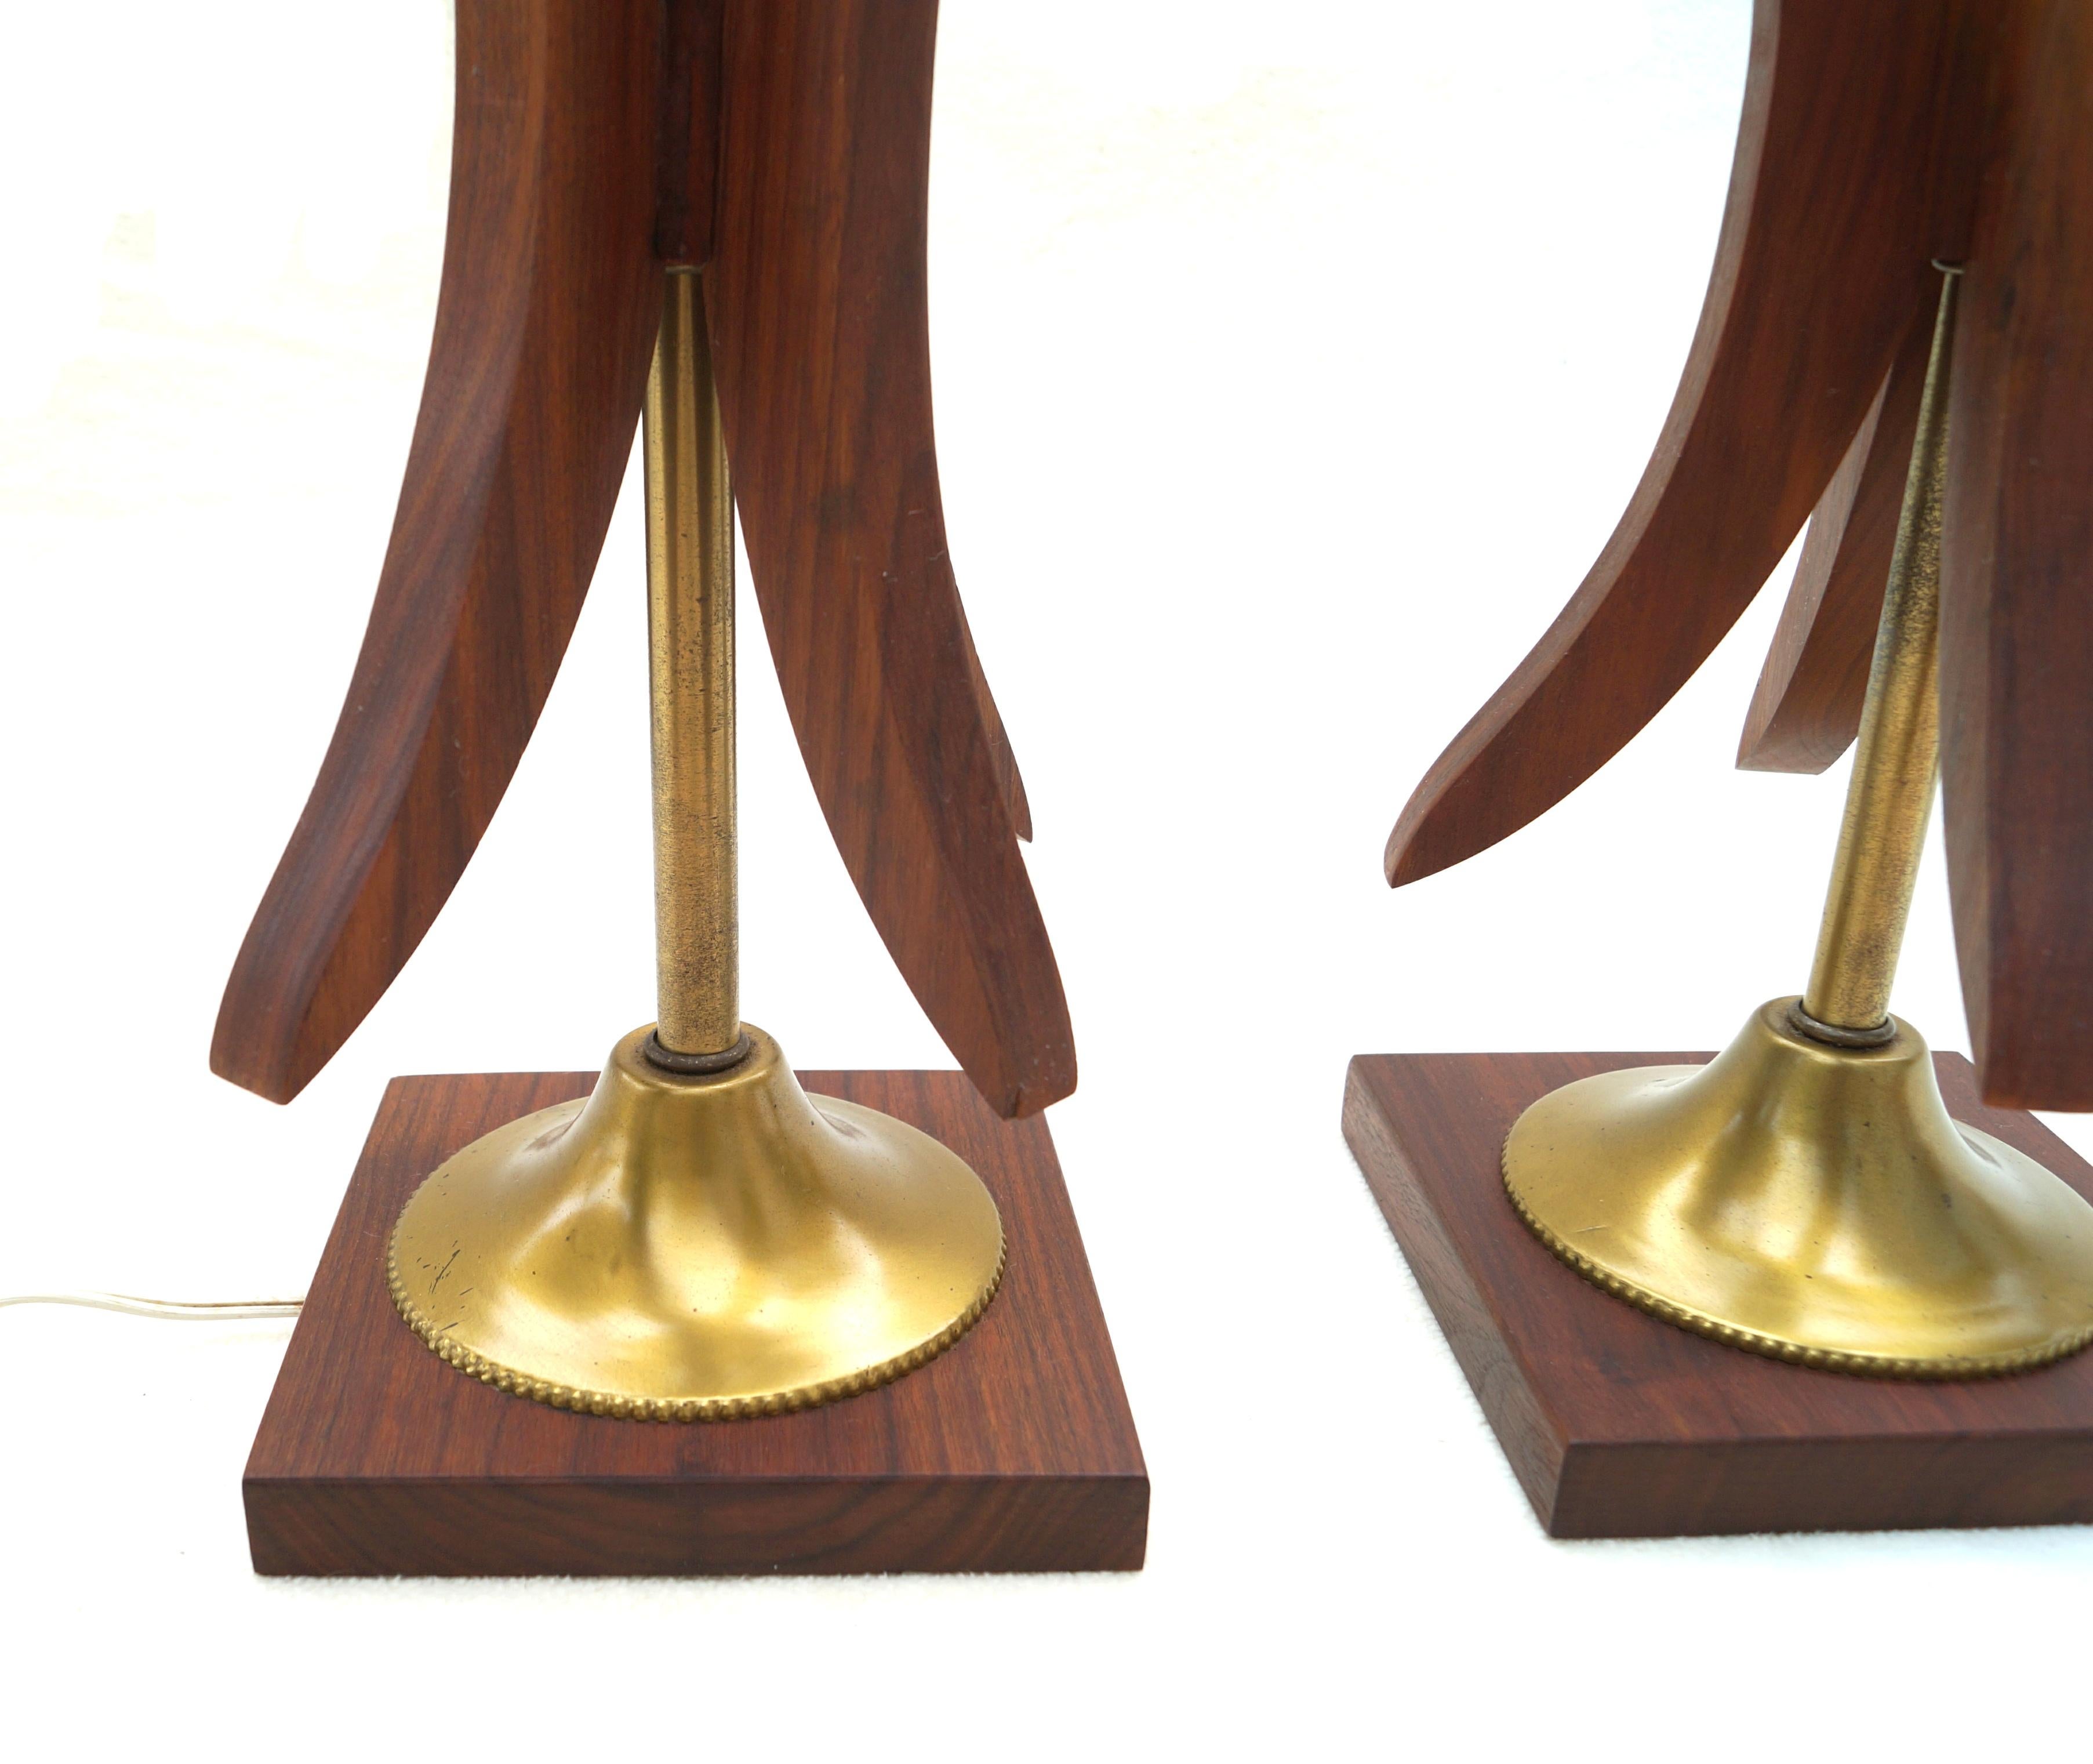 Wood Pair of Adrian Pearsall Attrib Sculptural Table Lamps Danish Mid-Century Modern For Sale